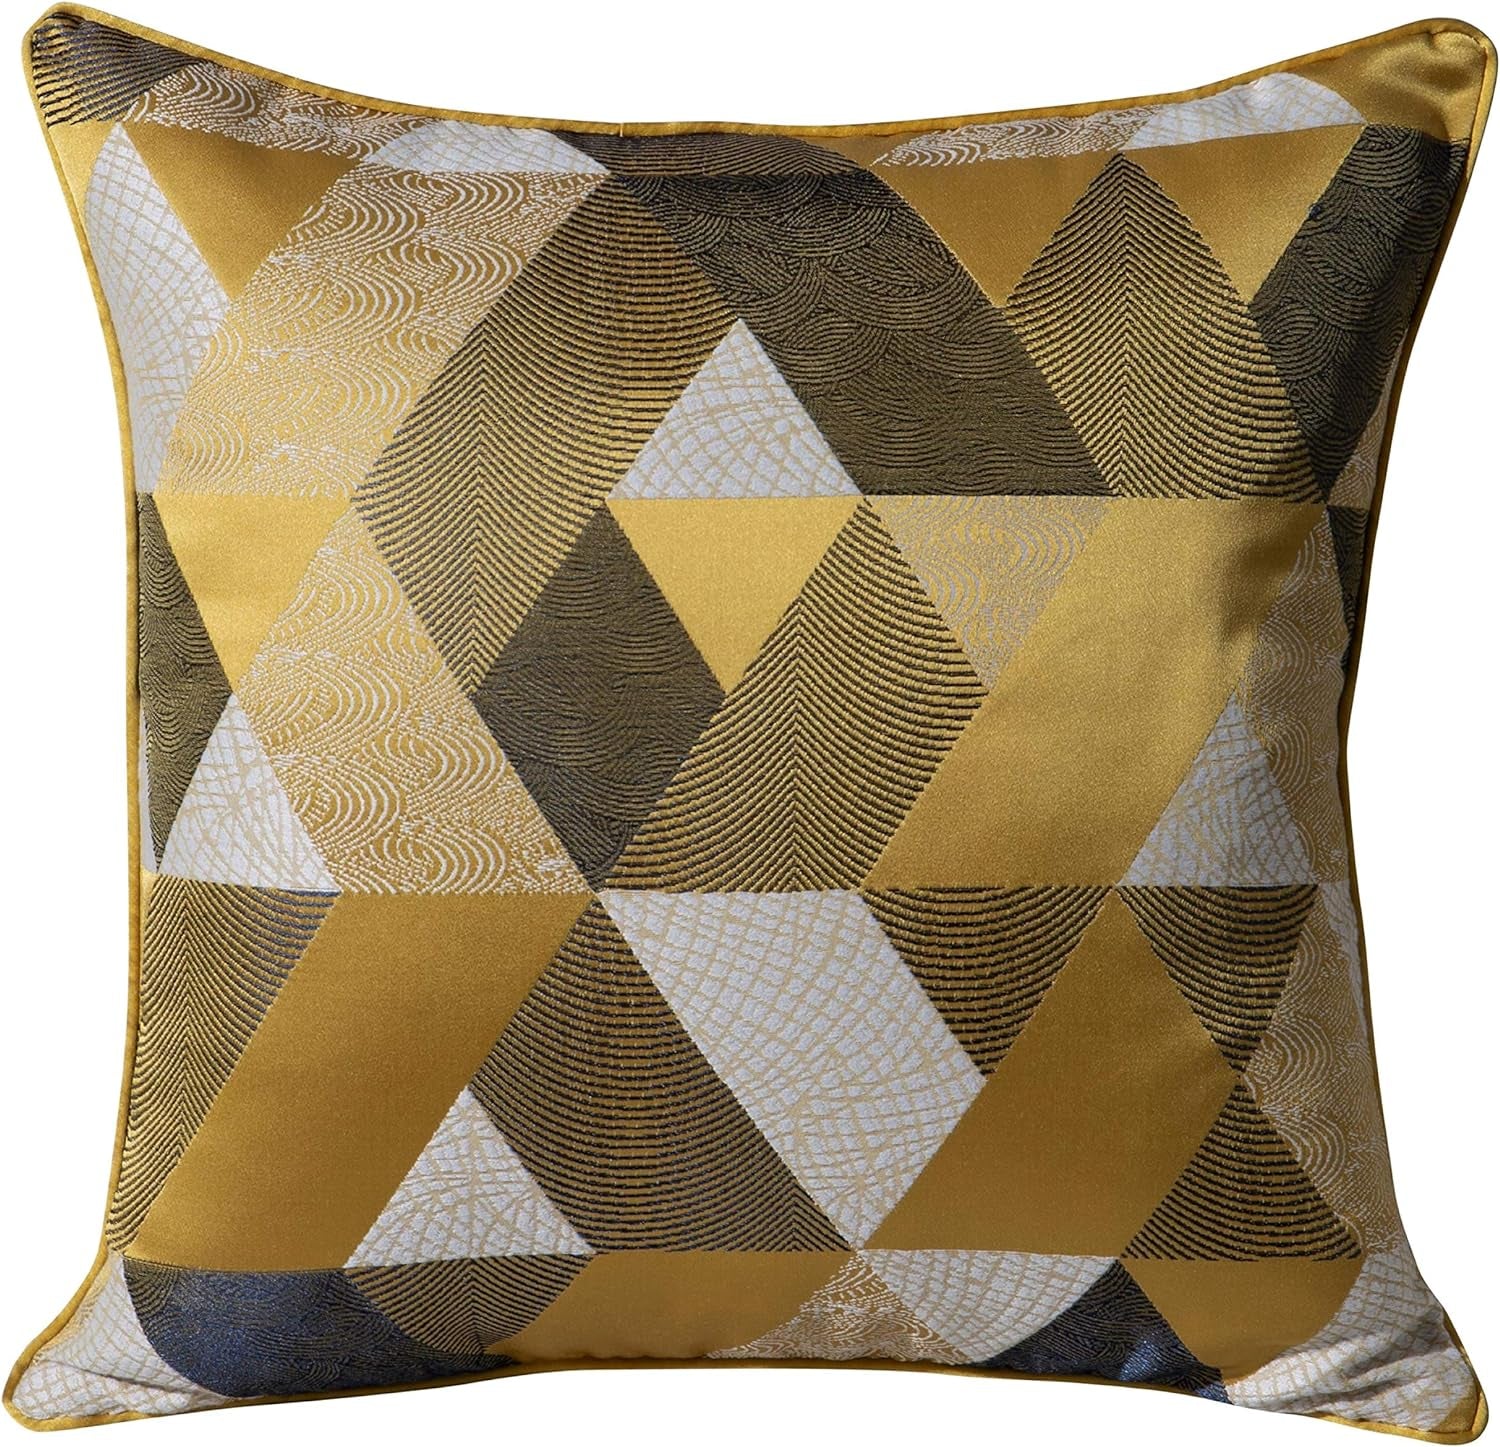 Decorative Throw Pillow Cover Luxury Jacquard Pillowcase Satin Square Cushion Case Geometric Pattern Shams for Couch Sofa Bed Bedroom Living Room Gold 18 X 18 Inch